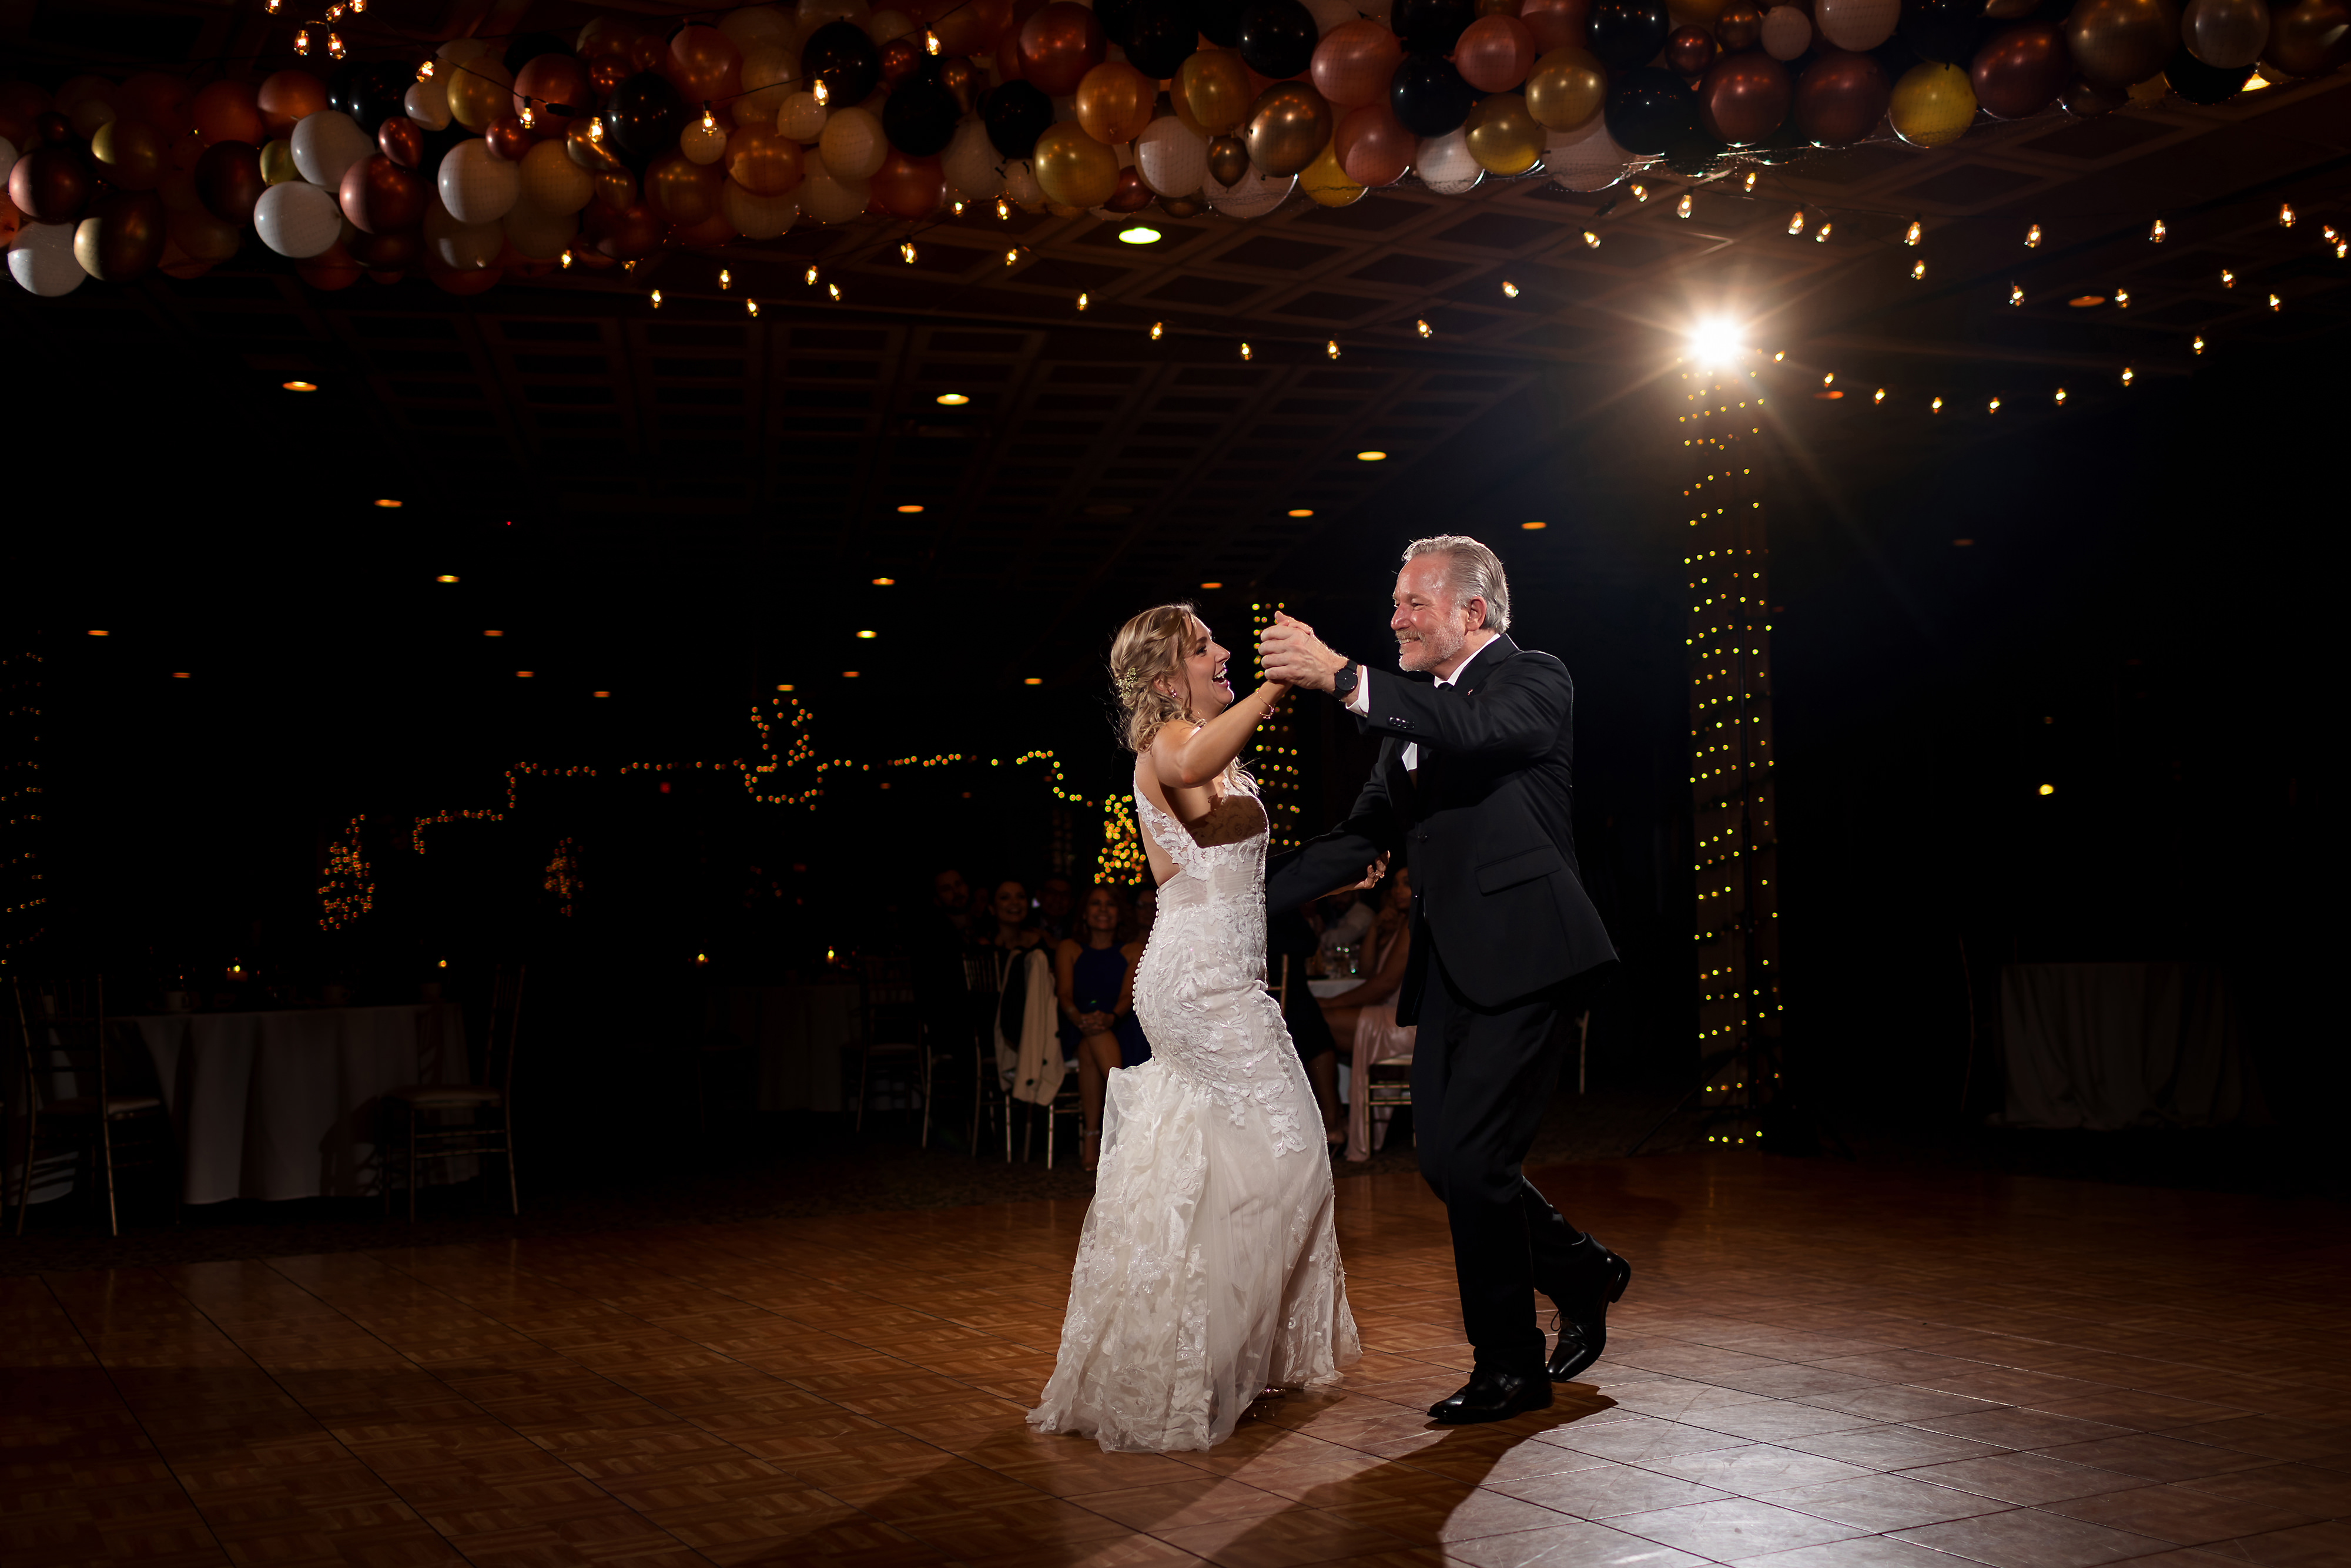 Bride dances with dad during wedding reception at Two Brothers Brewery in Aurora, Illinois